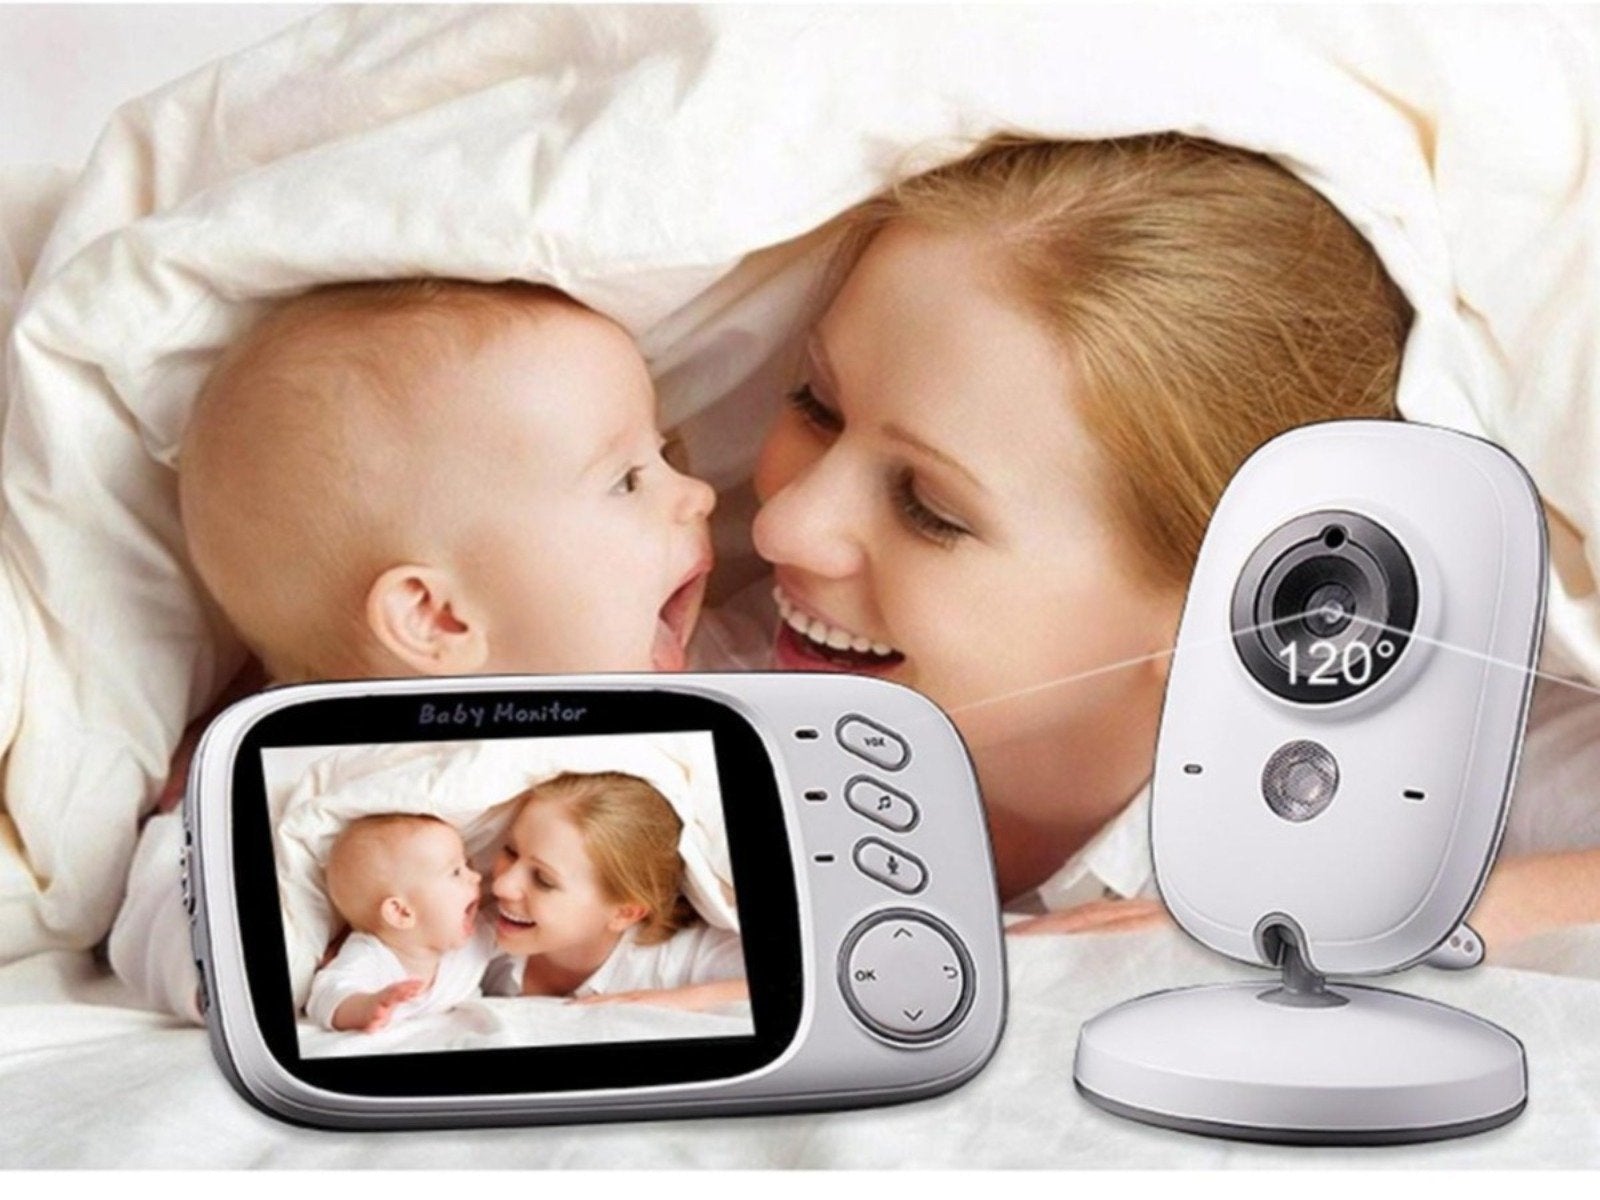 Video Baby Monitor Camera WiFi Smart App Home Security with Night Vision